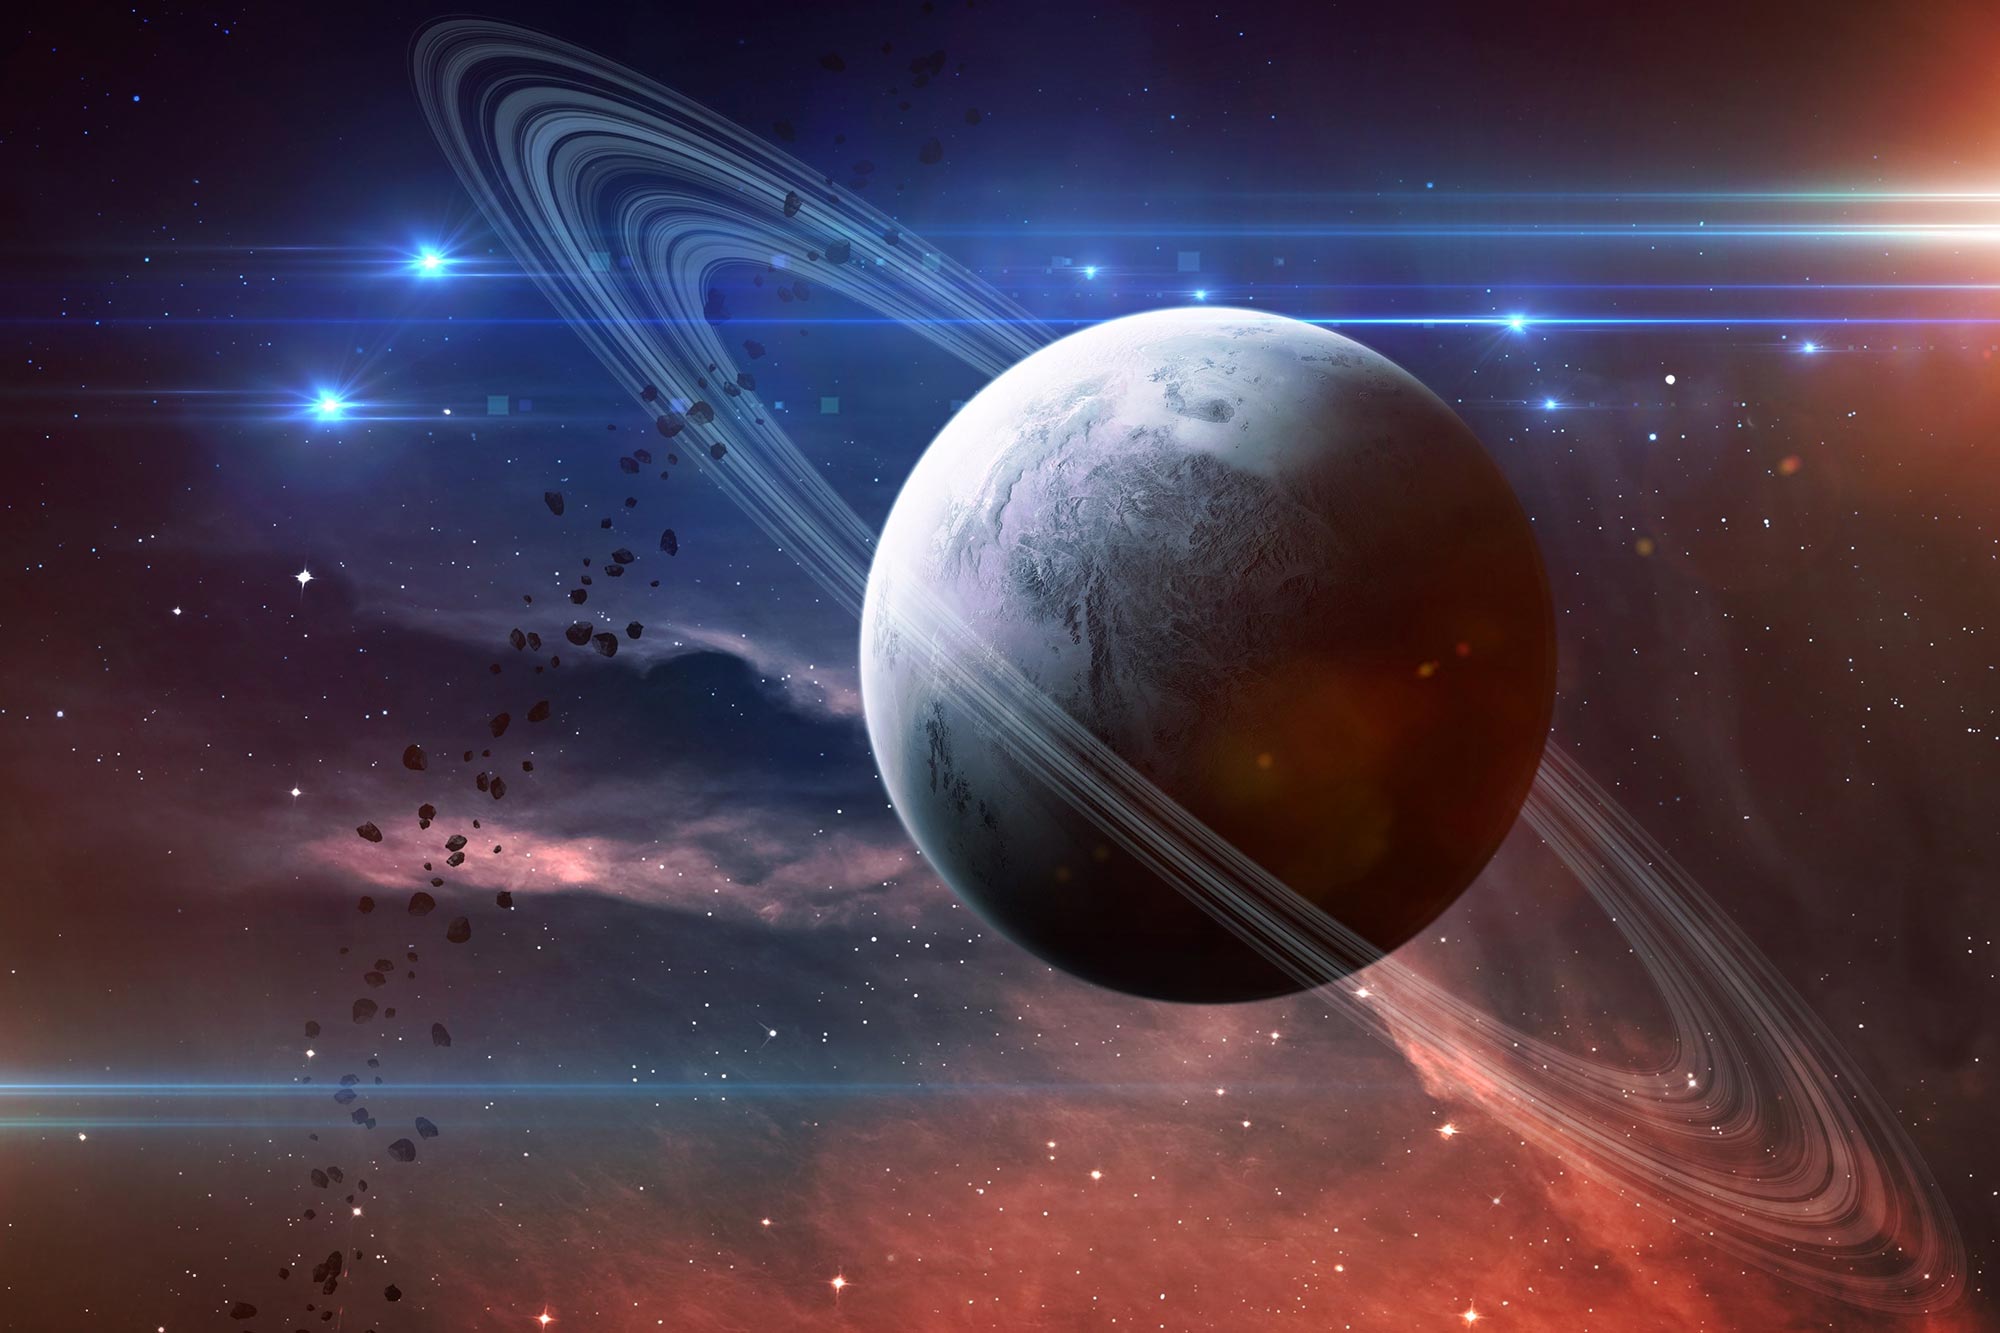 New Theory Suggests That the Origin of Life on Earth-Like Planets Is Likely